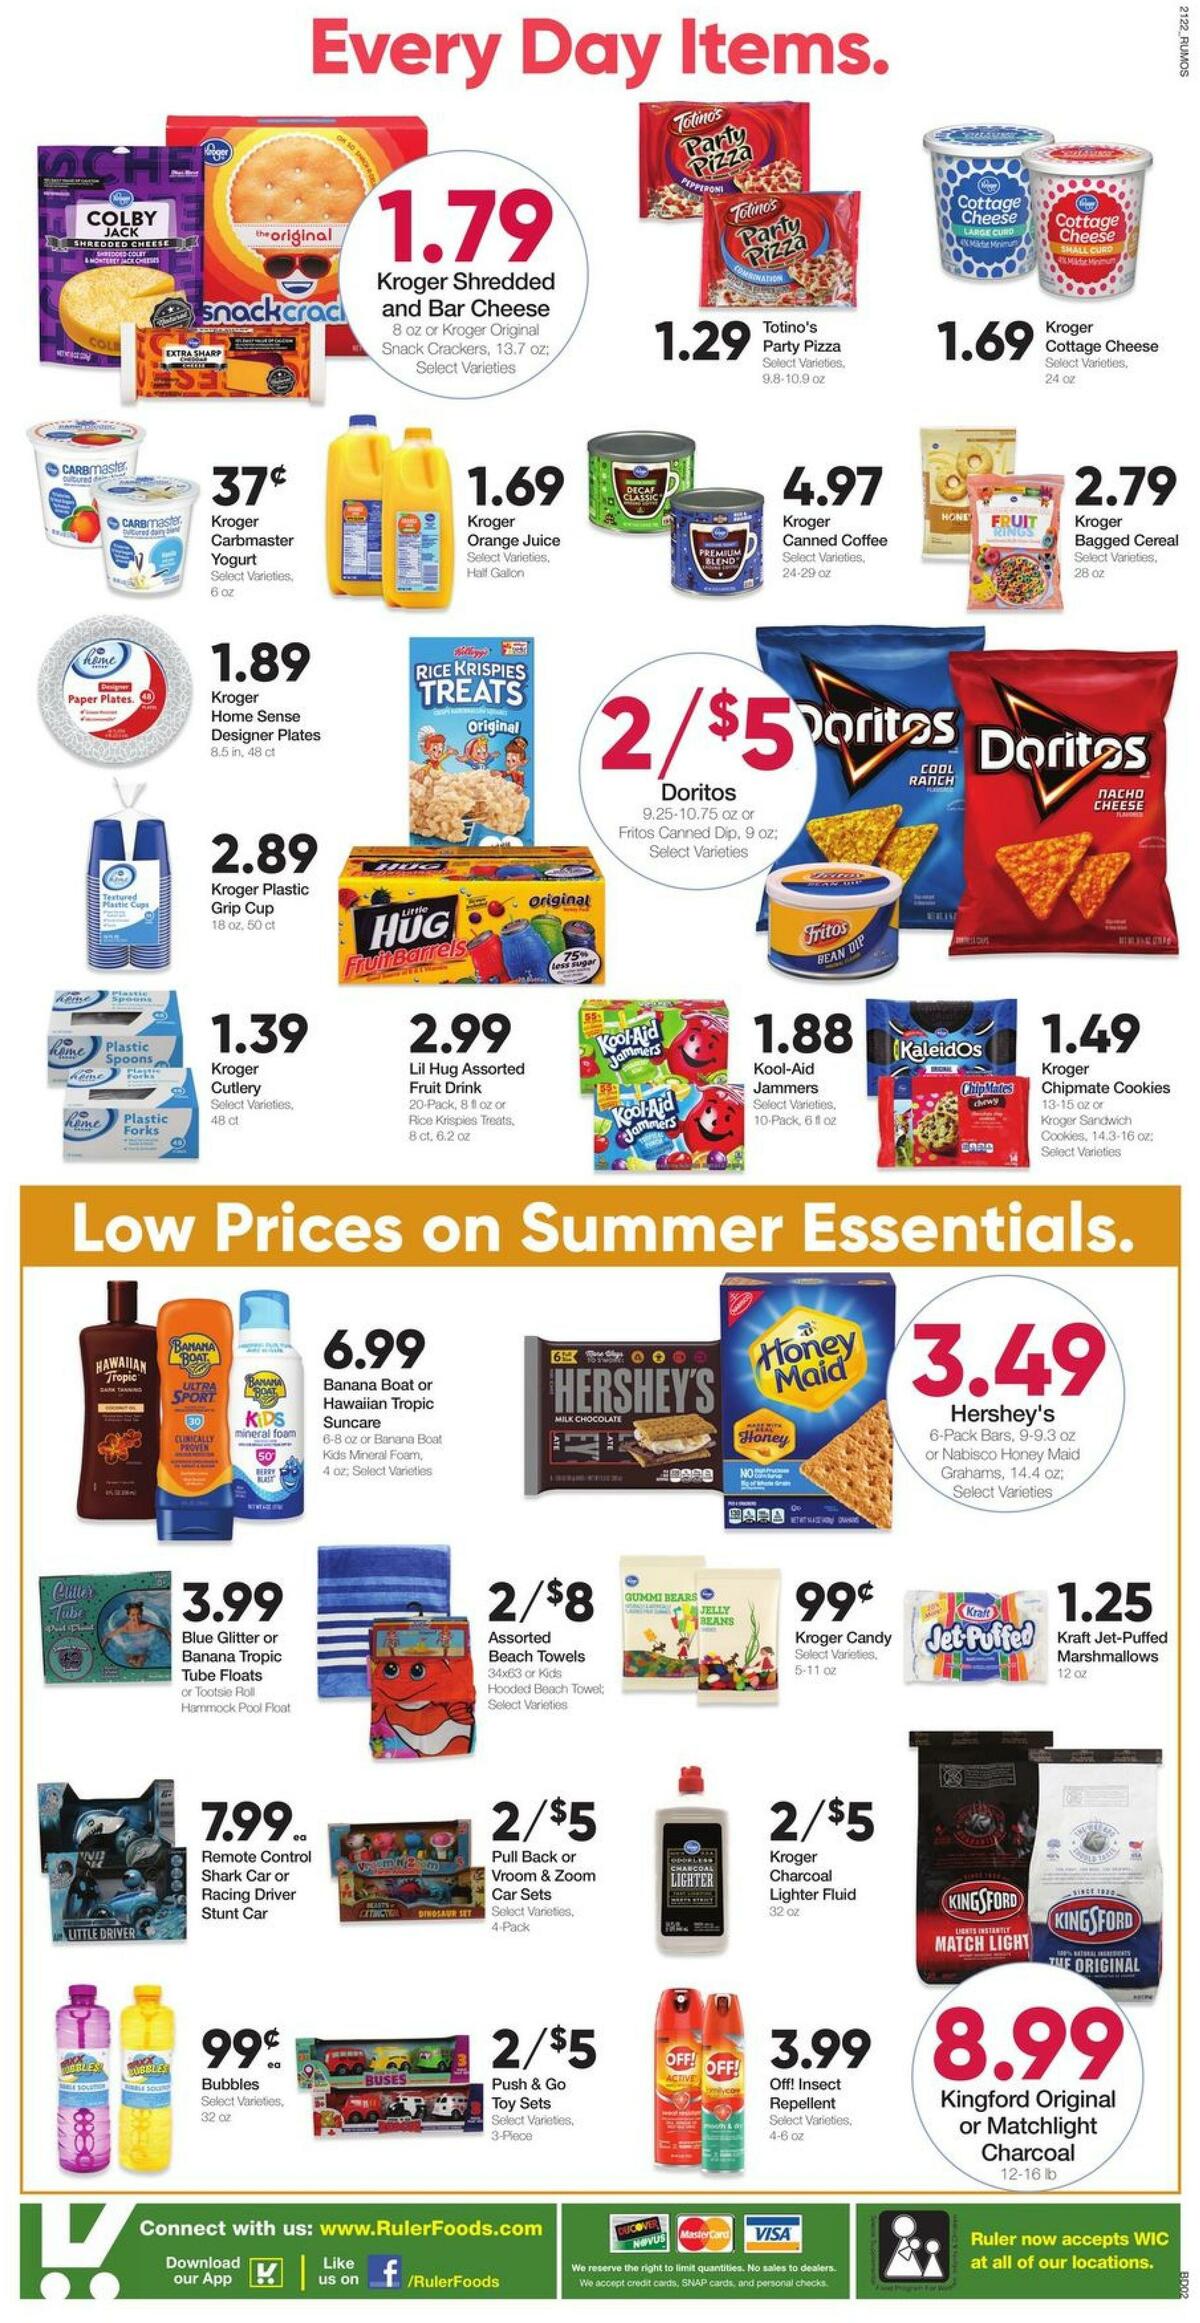 Ruler Foods Weekly Ad from June 30